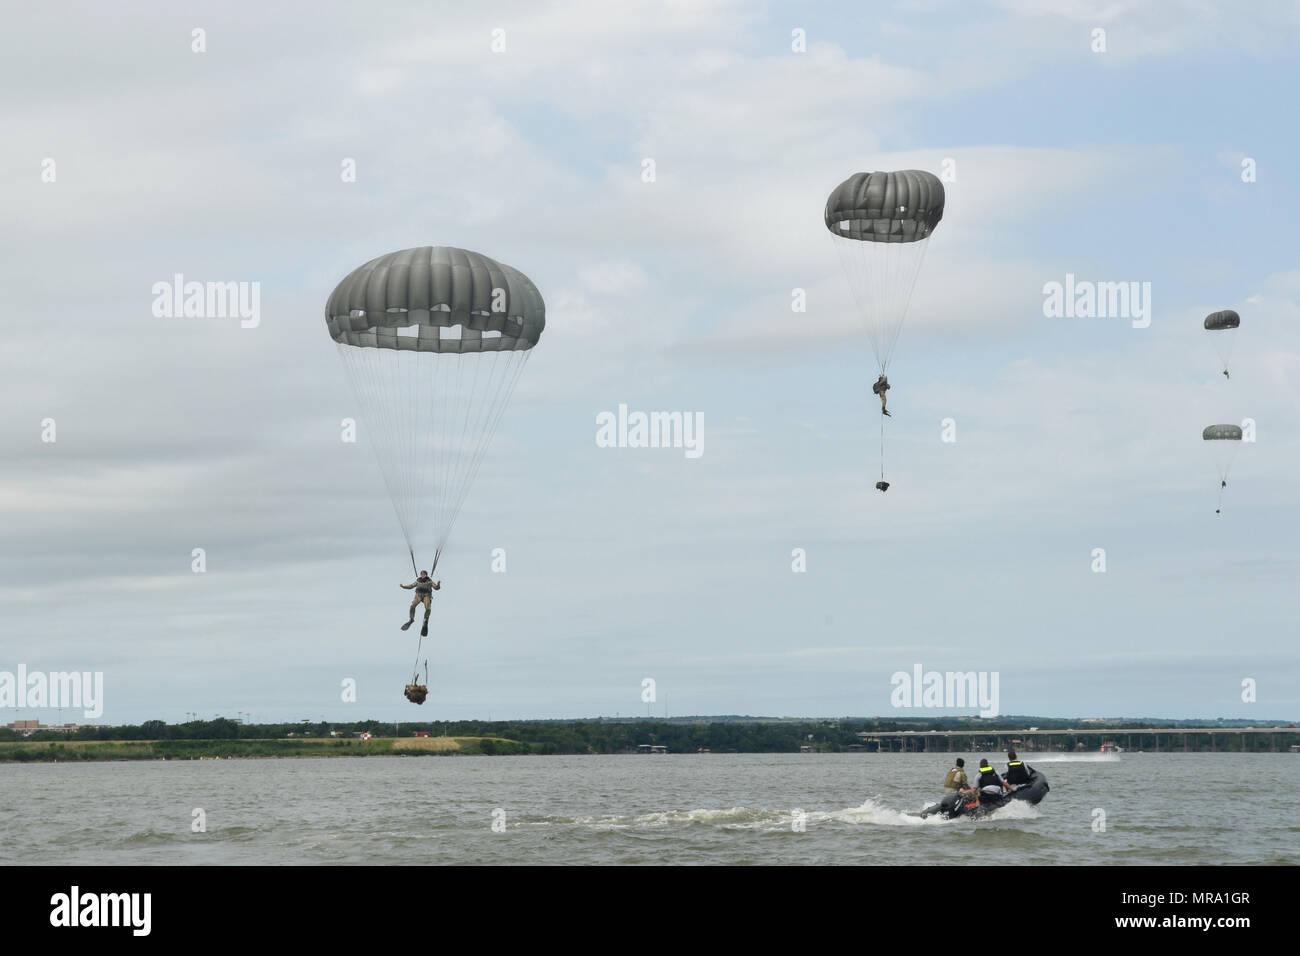 Members of the 181st Weather Flight parachute into Lake Worth after jumping out of a C-130 Hercules during a deliberate water drop in Forth Worth, Texas, May 20, 2017. The training mission was scheduled for members to practice airborne covert water parachute infiltration and included a joint effort between the Texas Air National Guard, Army, Coast Guard Auxiliary, and local fire department. (Texas Air National Guard photo by Staff Sgt. Kristina Overton) Stock Photo